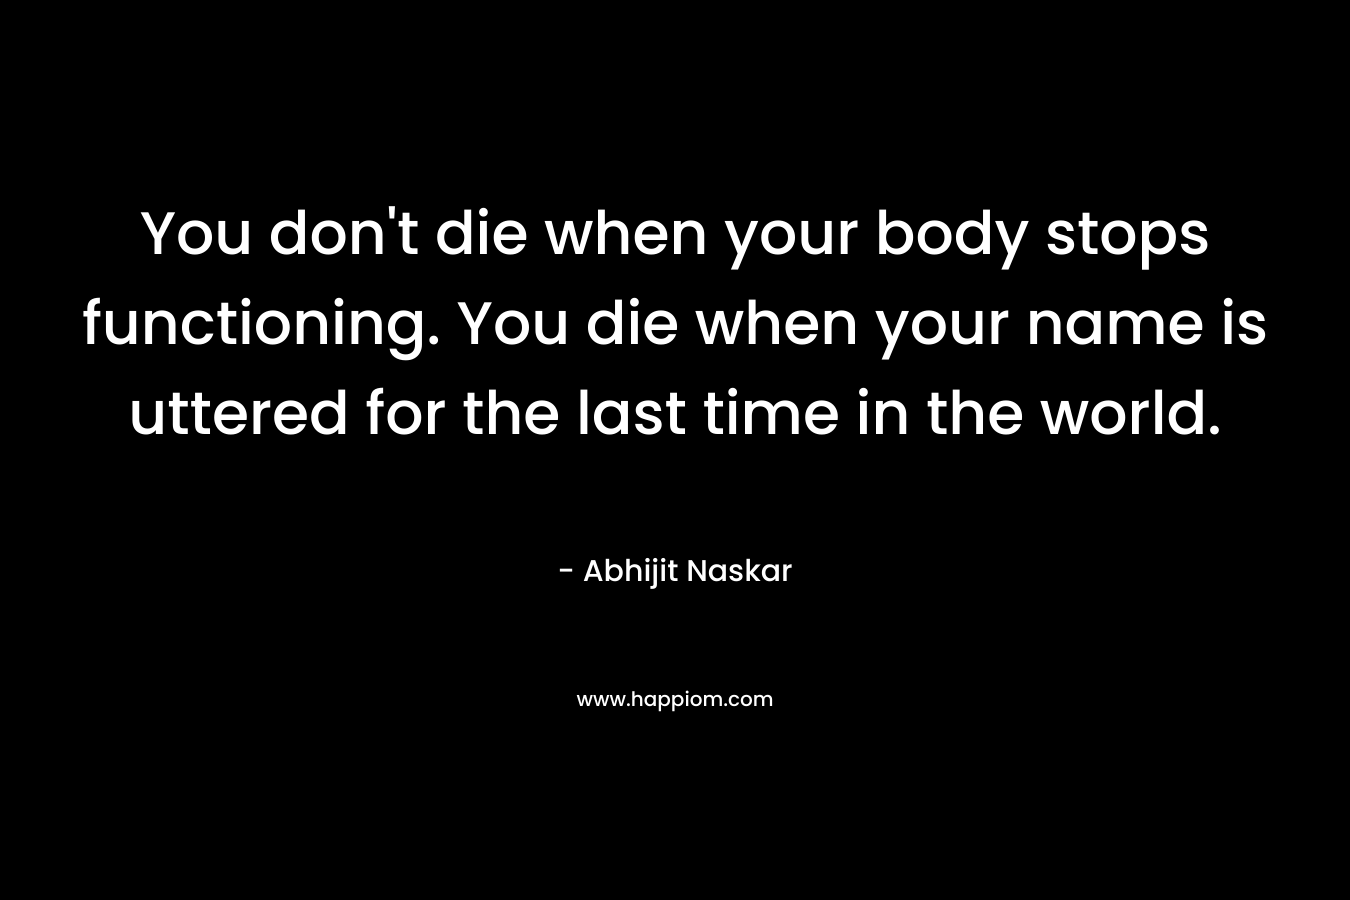 You don’t die when your body stops functioning. You die when your name is uttered for the last time in the world. – Abhijit Naskar